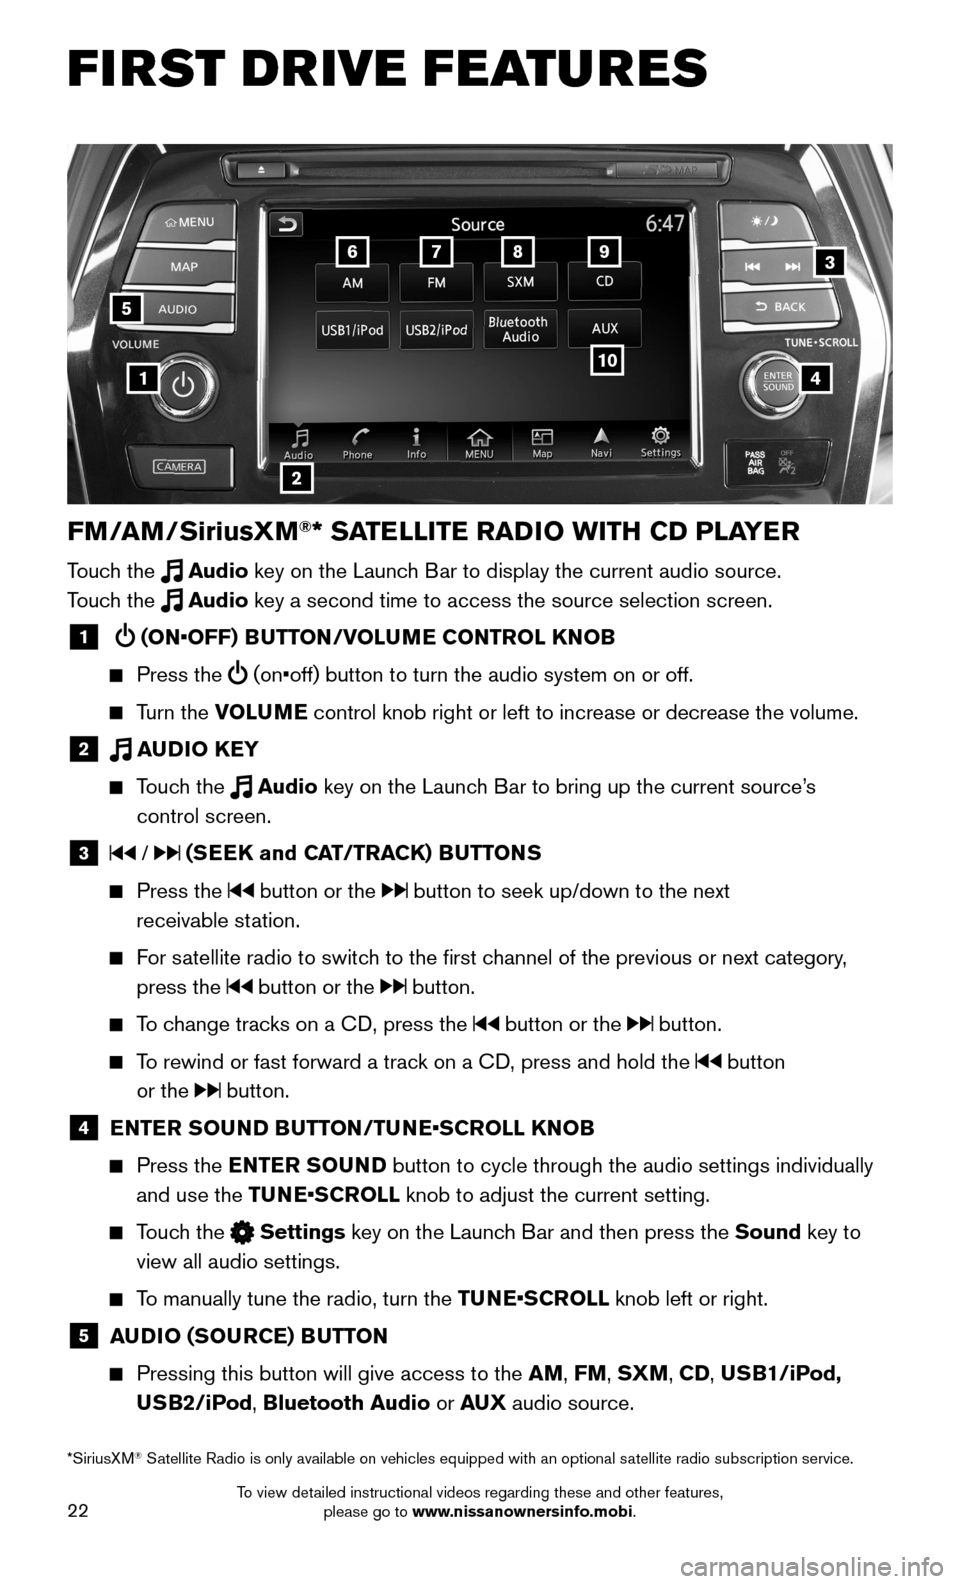 NISSAN MAXIMA 2016 A36 / 8.G Quick Reference Guide 22
FM/AM/SiriusXM®* SATELLITE RADIO WITH CD PLAYER 
Touch the  Audio key on the Launch Bar to display the current audio source.  
Touch the  Audio key a second time to access the source selection scr